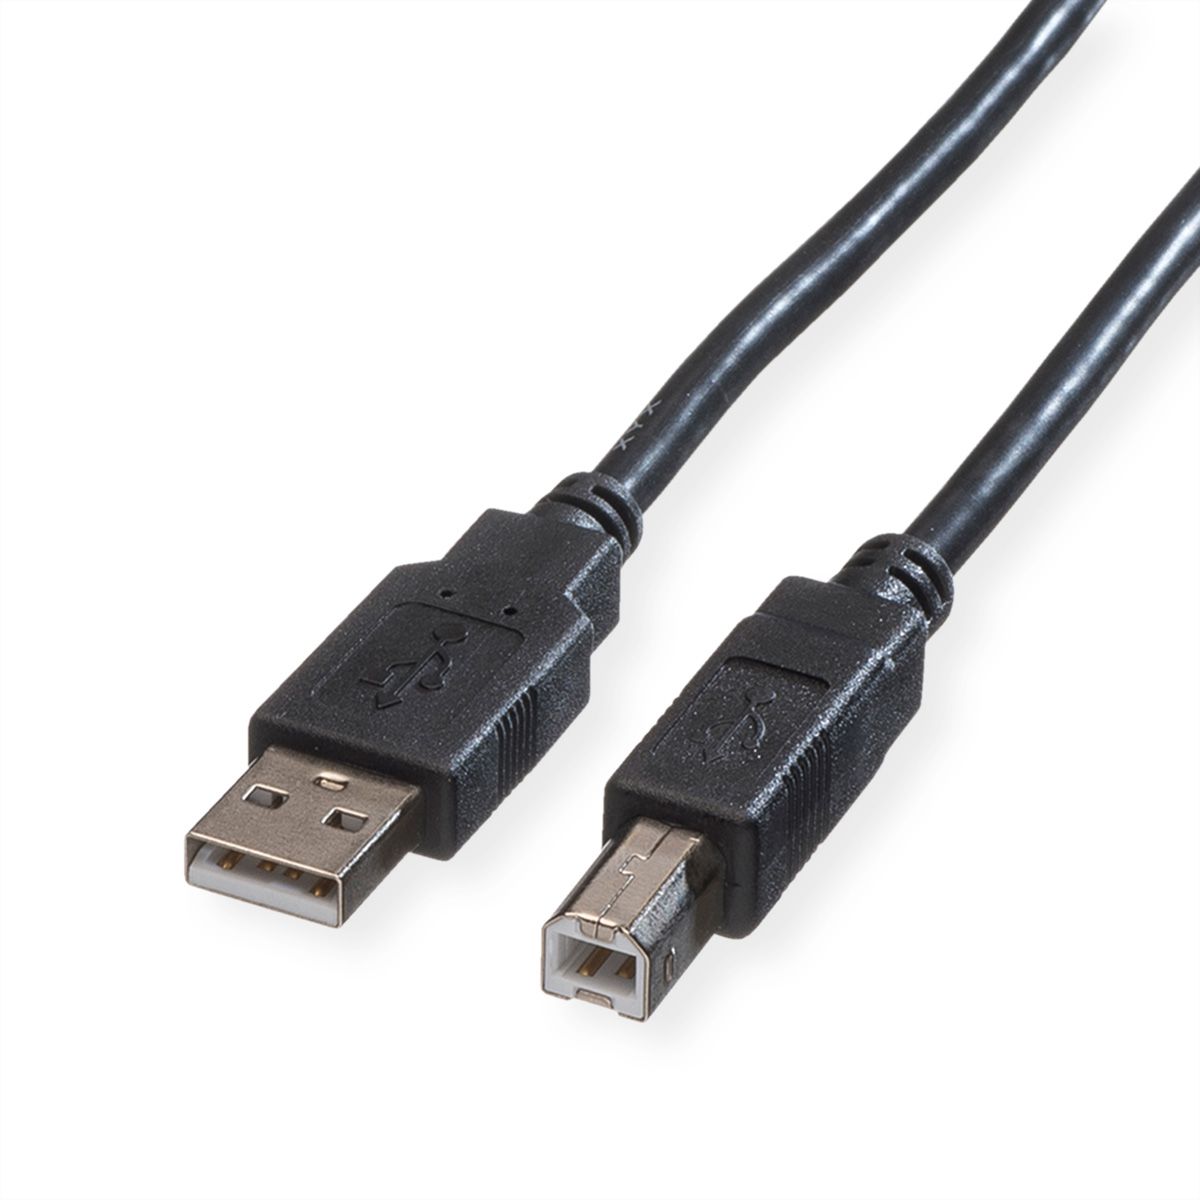 4.5m. Length USB Interface USB 2.0 A Male to B Male Extension/Data Transfer/Printer Cable 